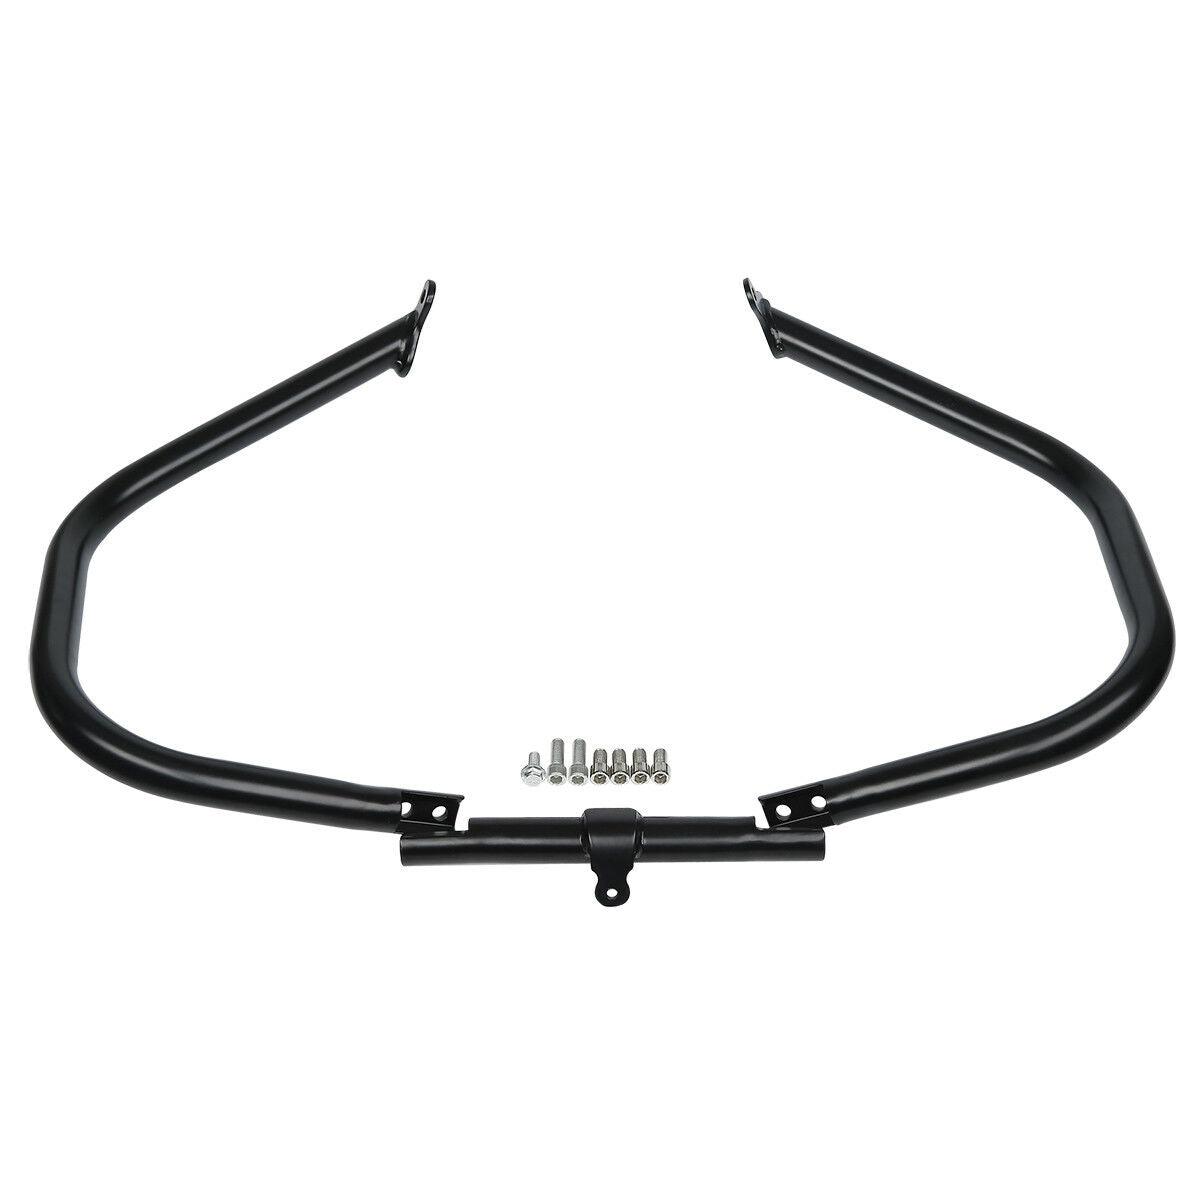 Engine Guard Crash Bar Fit For Harley Road Glide Trike Ultra Limited 09-22 2019 - Moto Life Products